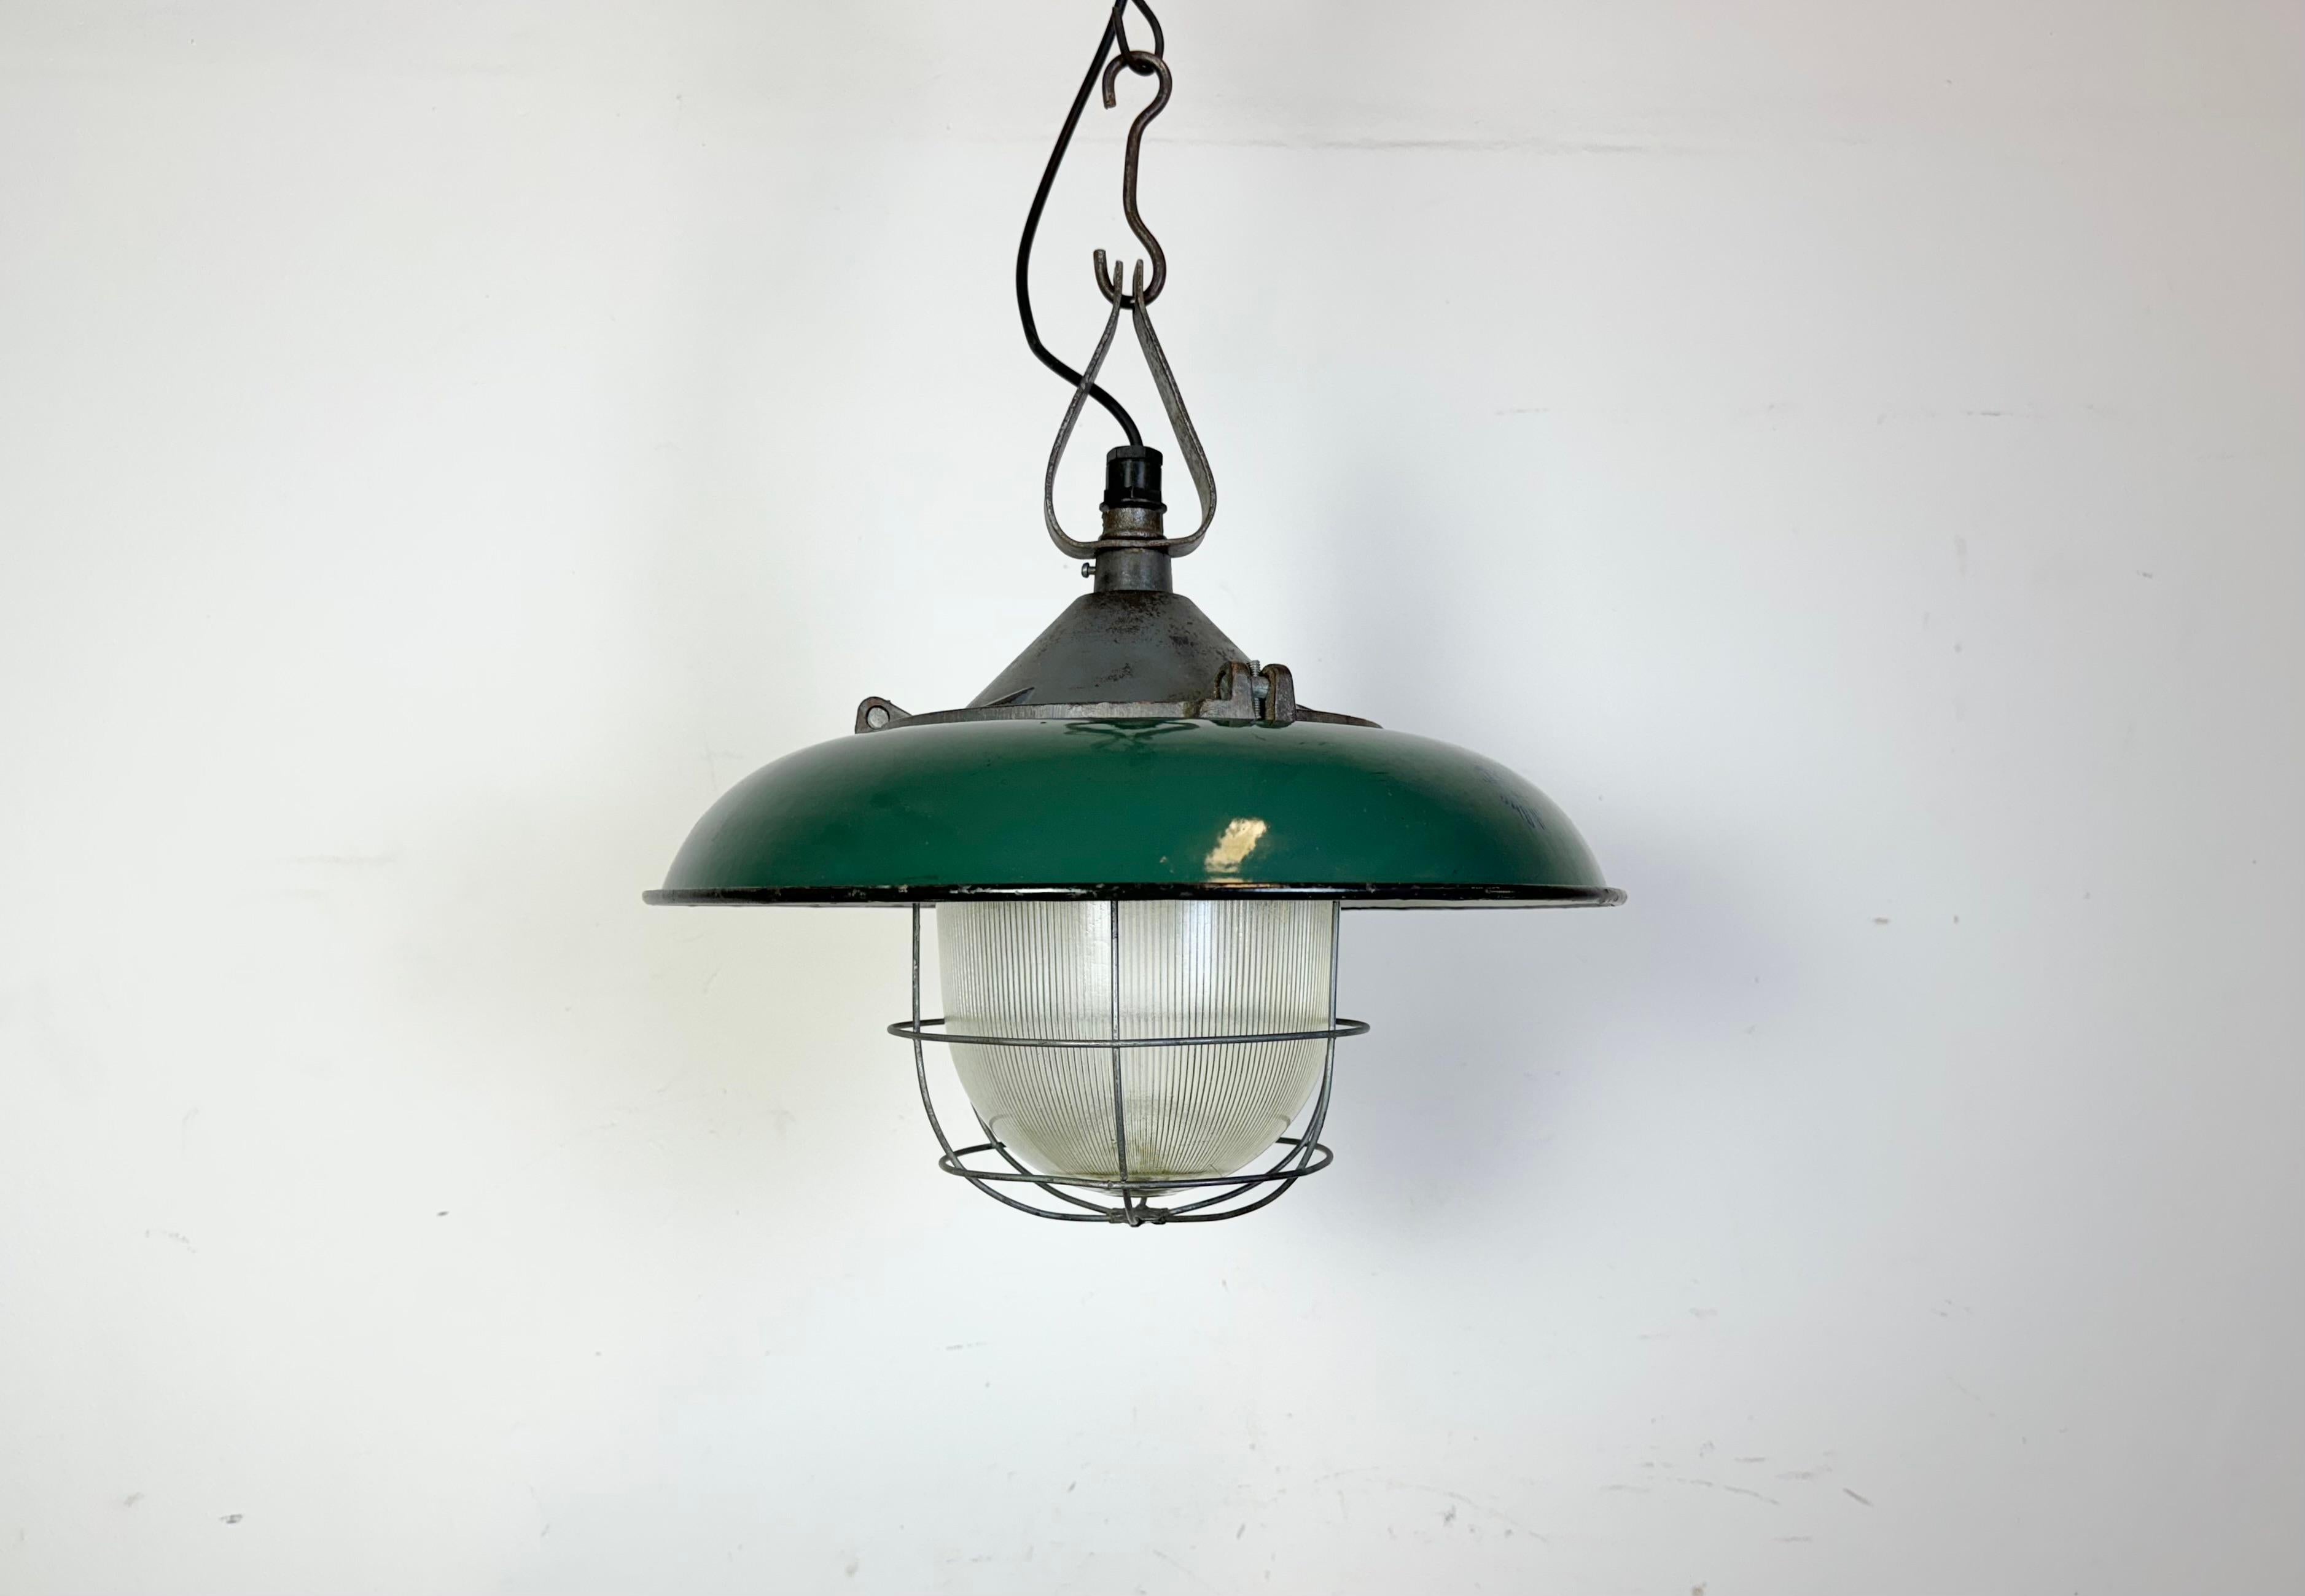 - Industrial factory pendant lamp in cast iron.
- Manufactured by A23 Factory in Wilkasy  in Poland during the 1960s.
- Green enamel shade with white enamel interior.
- Holophane glass cover and iron grid.
- Weight: 6,5 kg.
- New wire.
- Socket